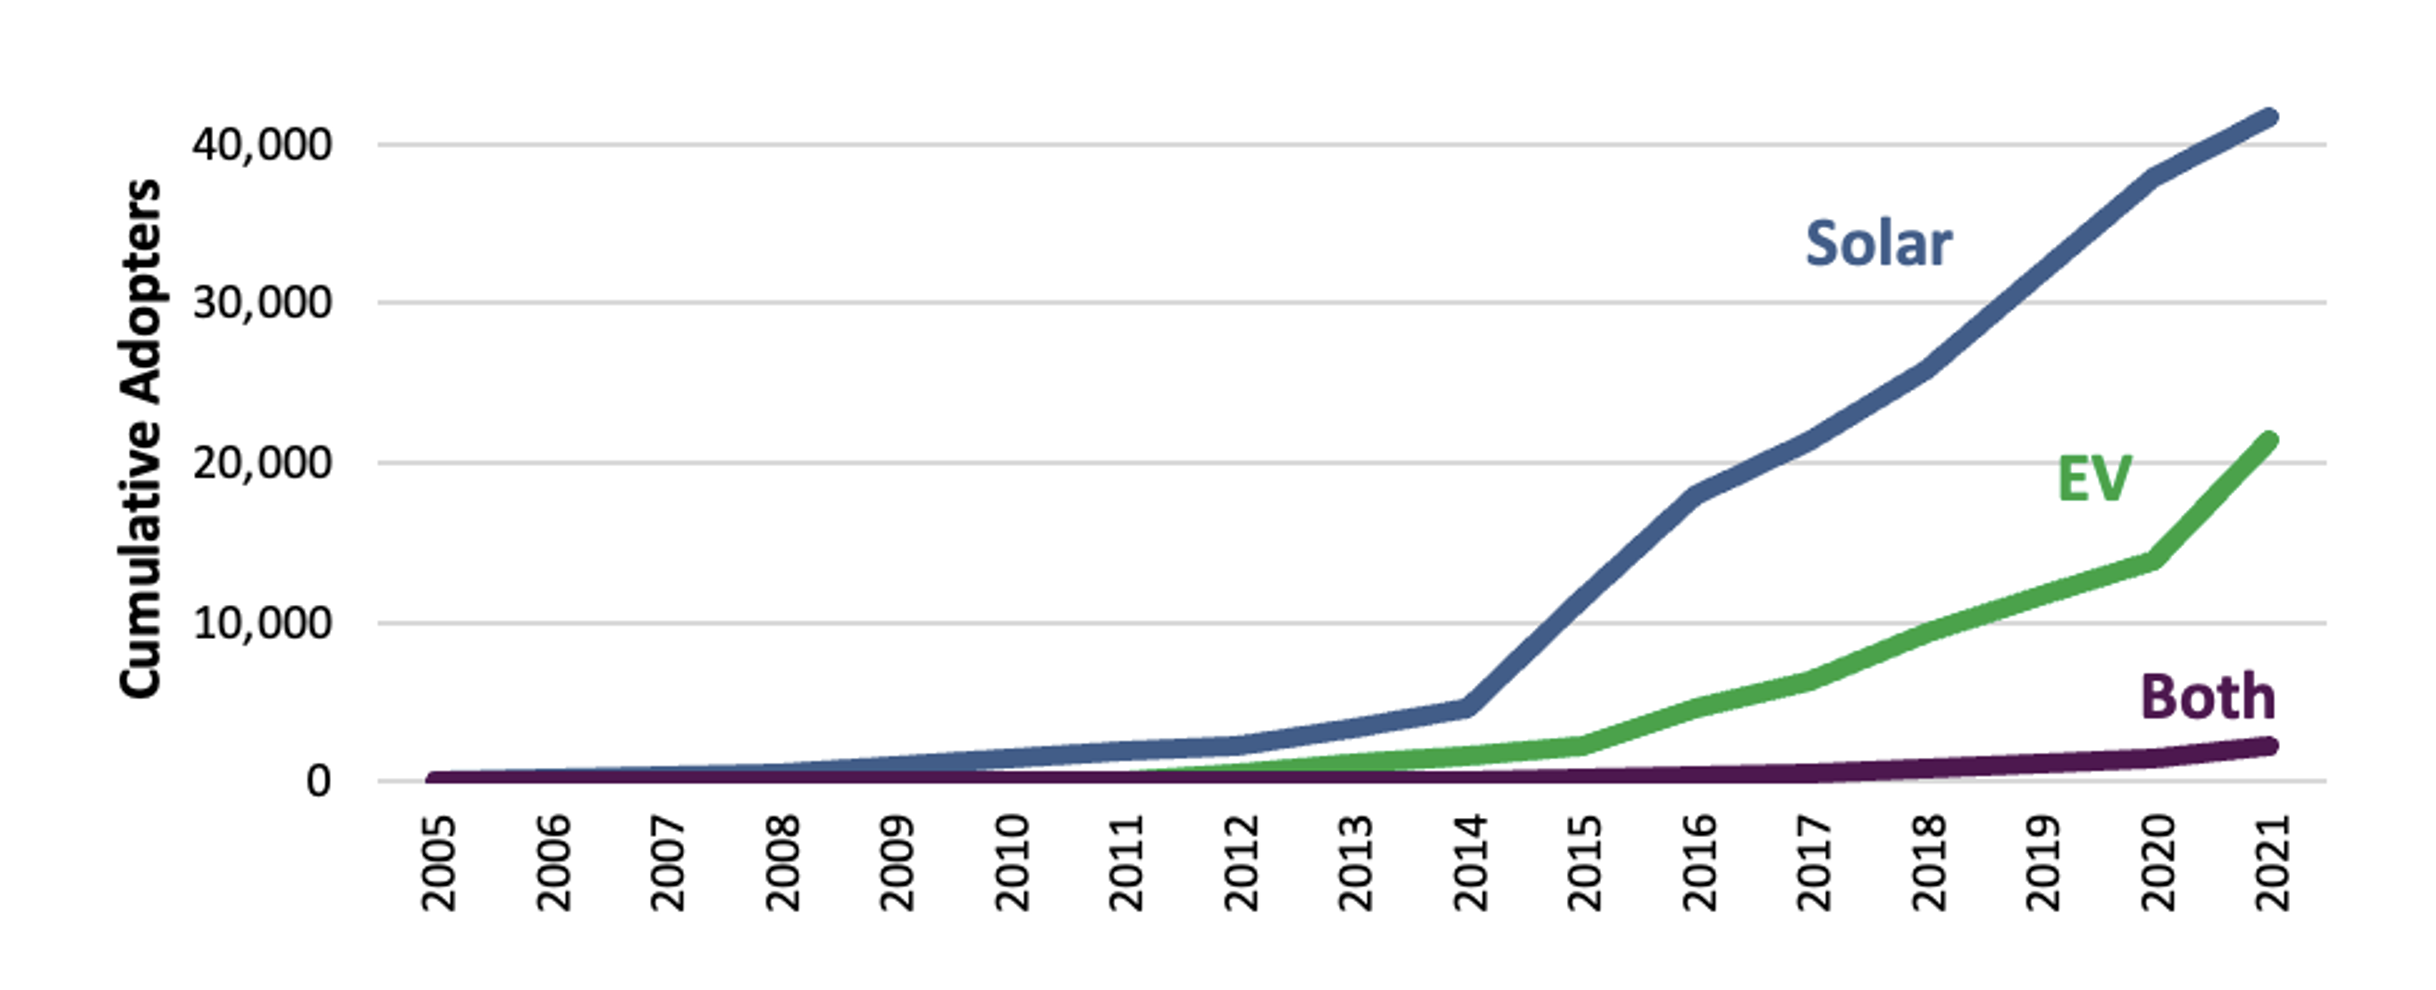 Line chart of Connecticut EV and Solar Adoption Over Time